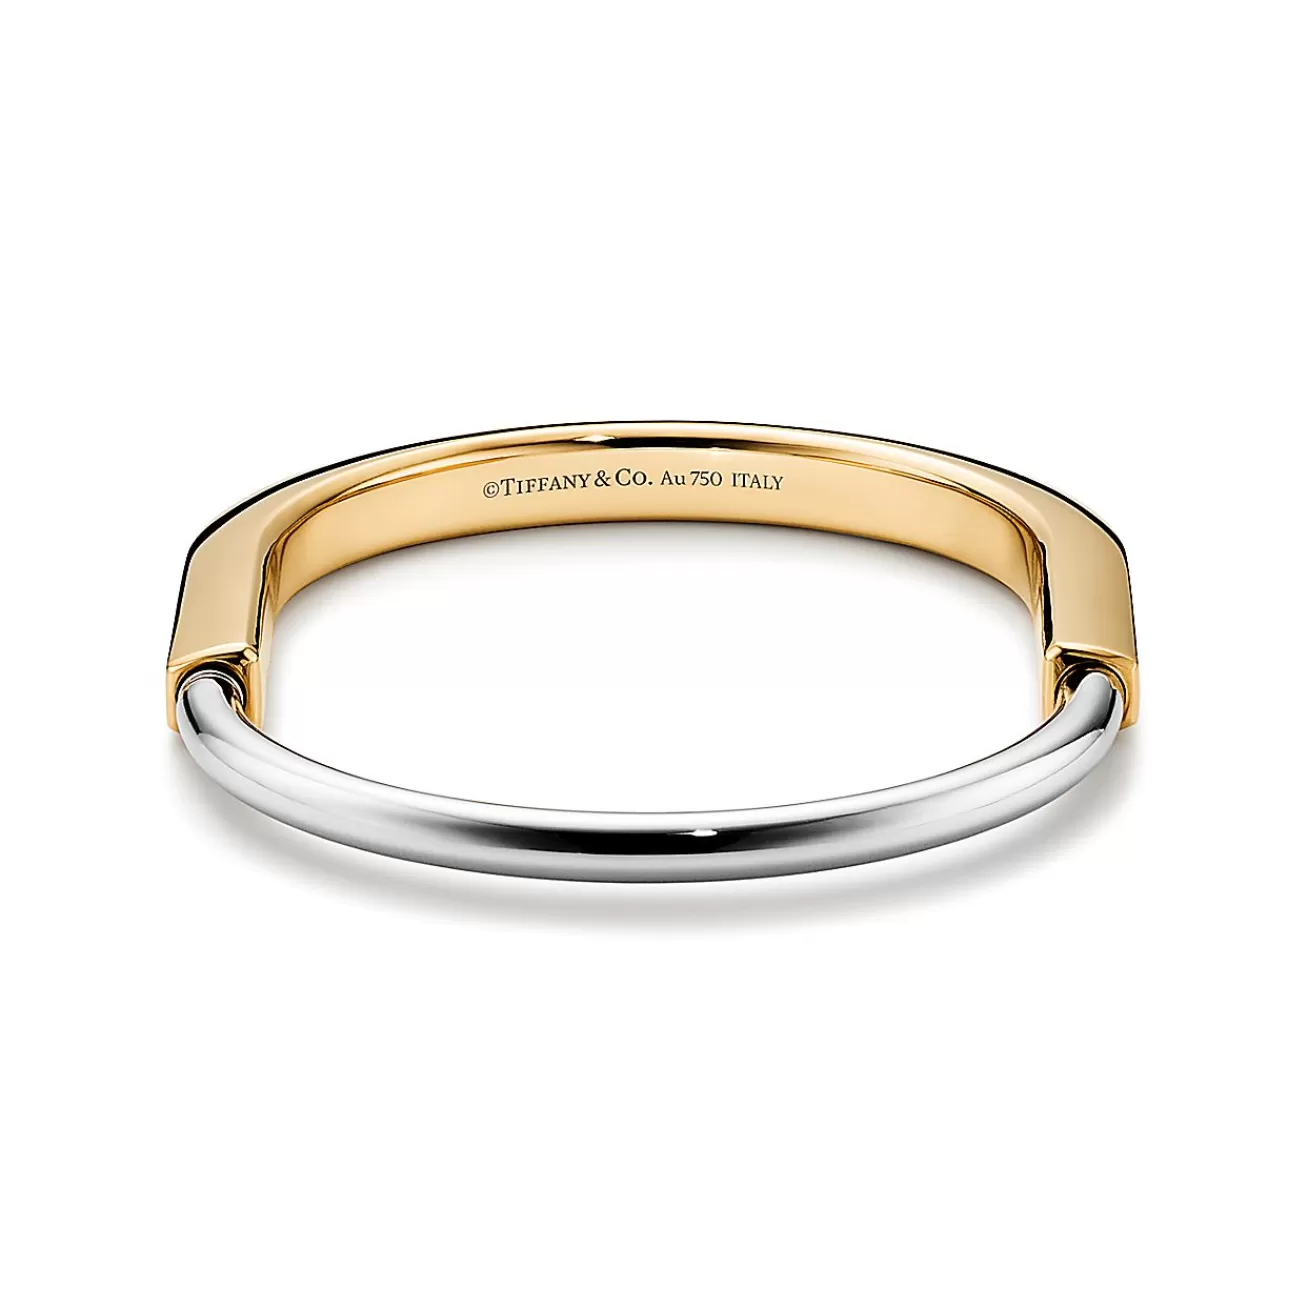 Tiffany & Co. Tiffany Lock Bangle in Yellow and White Gold | ^ Bracelets | Gifts for Her